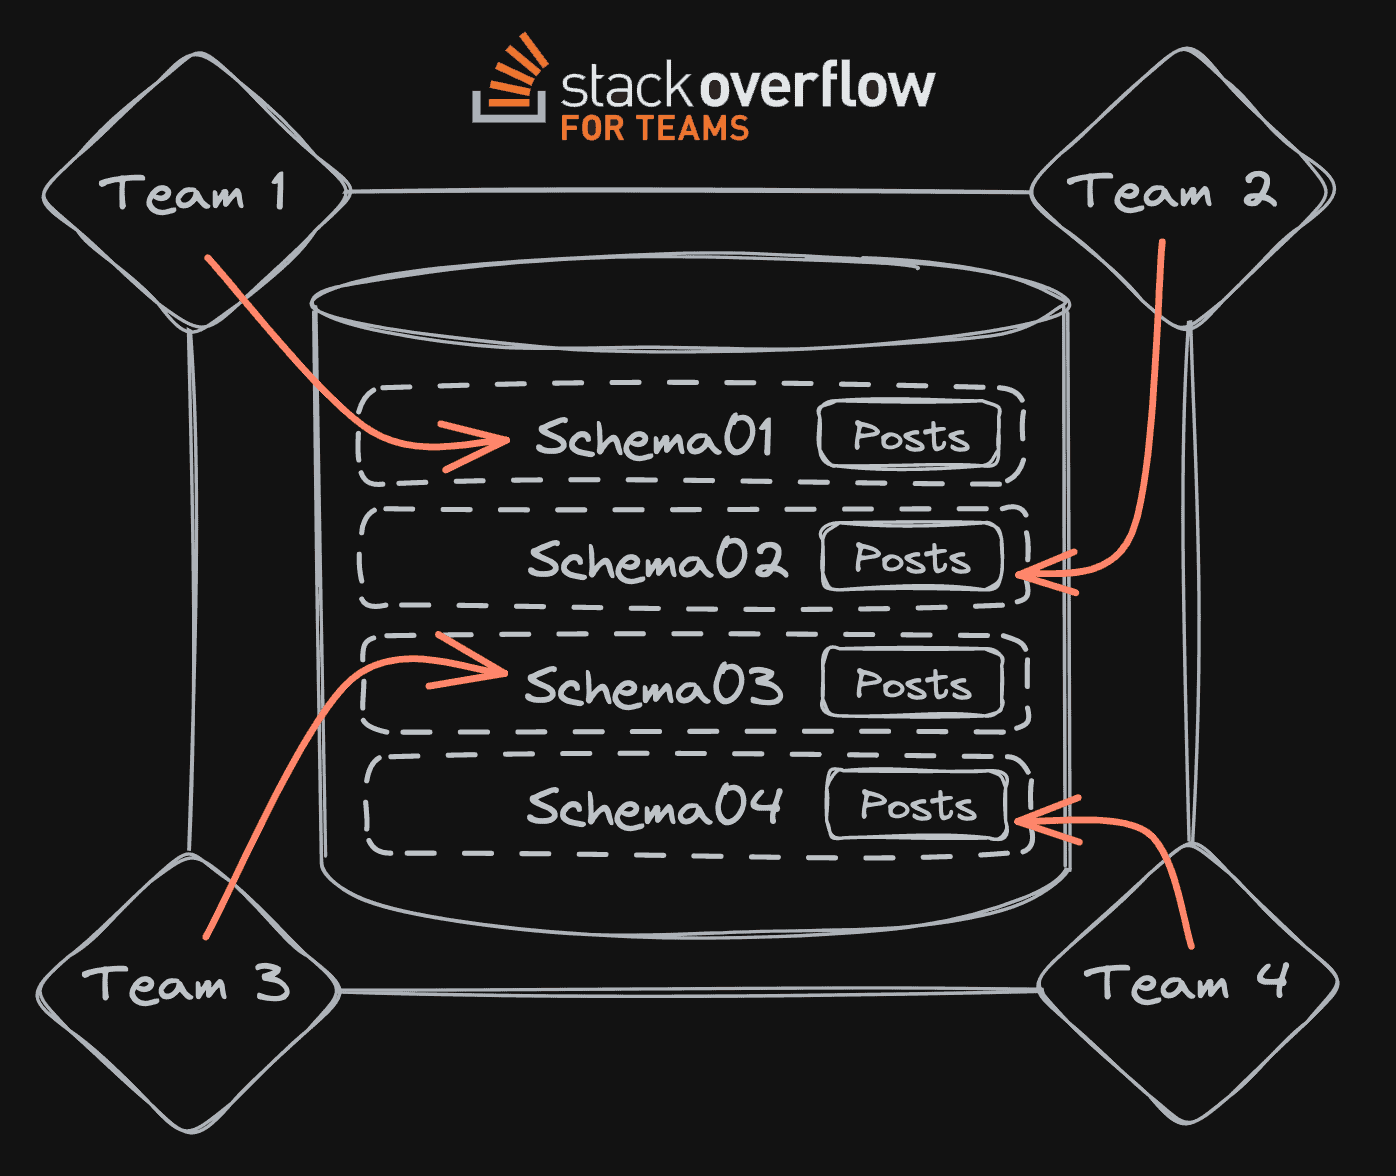 How teams interact with tables in Stack Overflow for Teams